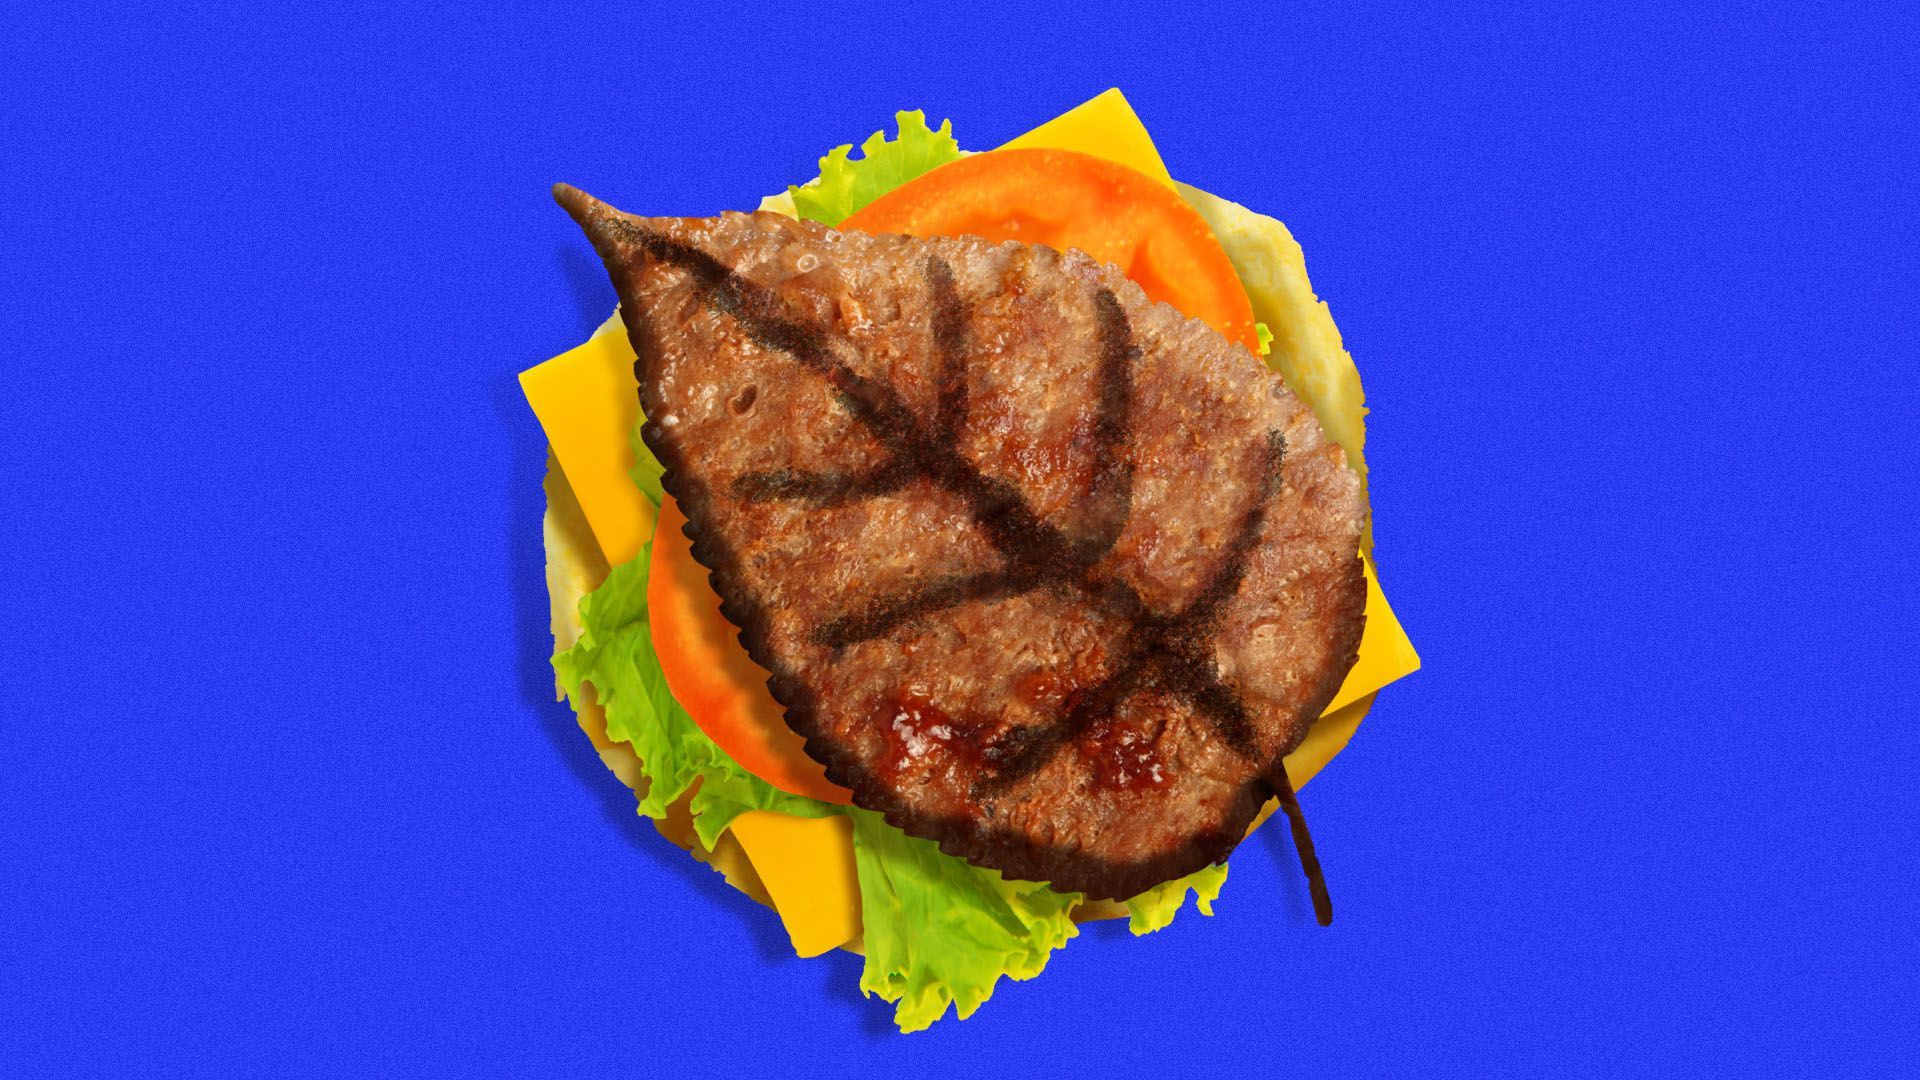 Illustration of a cheeseburger with a patty shaped like a plant